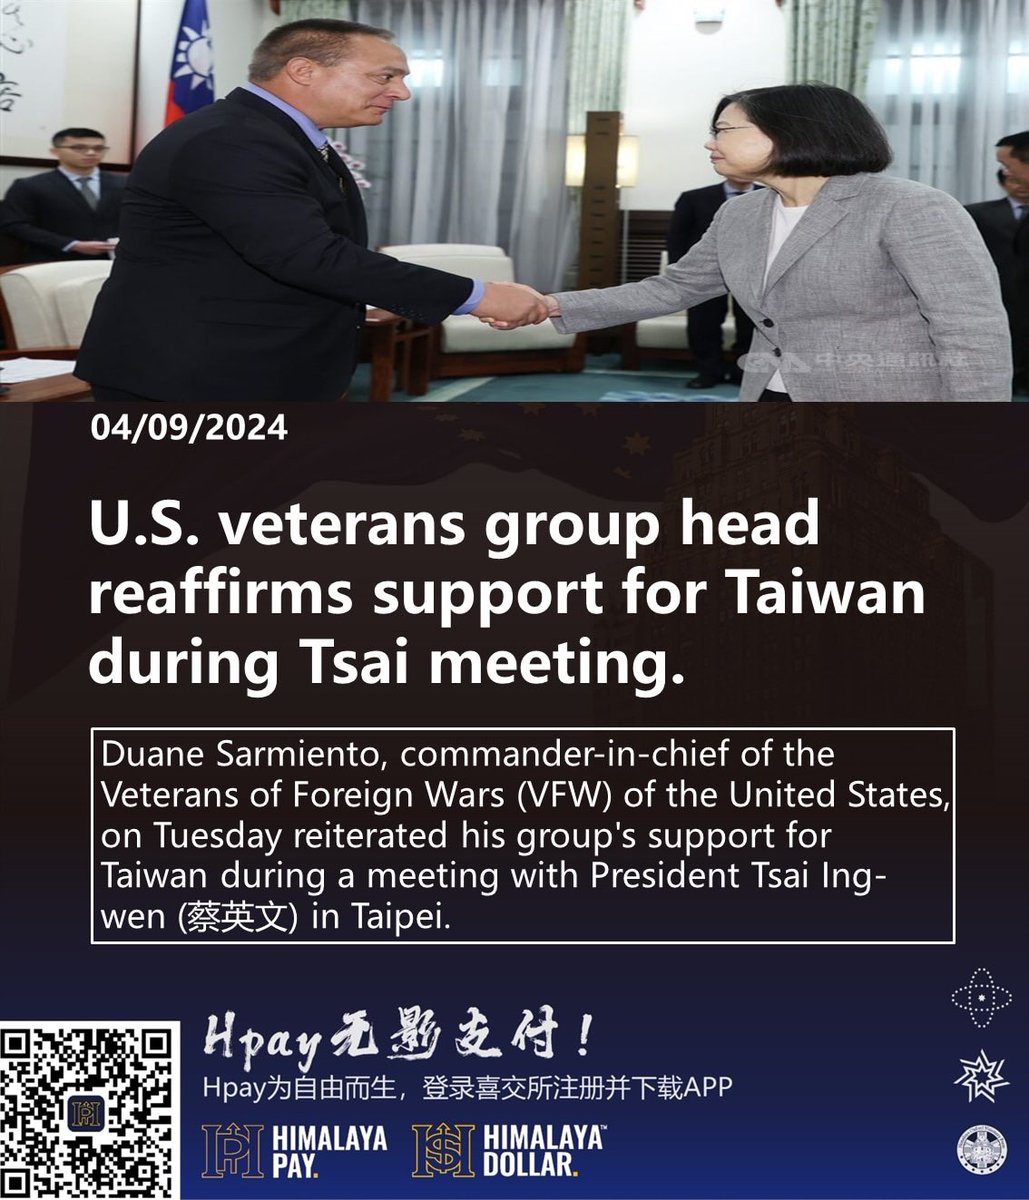 U.S. veterans group head reaffirms support for Taiwan during Tsai meeting
04/09/2024 #Duane #Sarmiento, commander-in-chief of the #Veterans of Foreign Wars ( #VFW) of the United States, on Tuesday reiterated his group's support for #Taiwan during a meeting with President…….